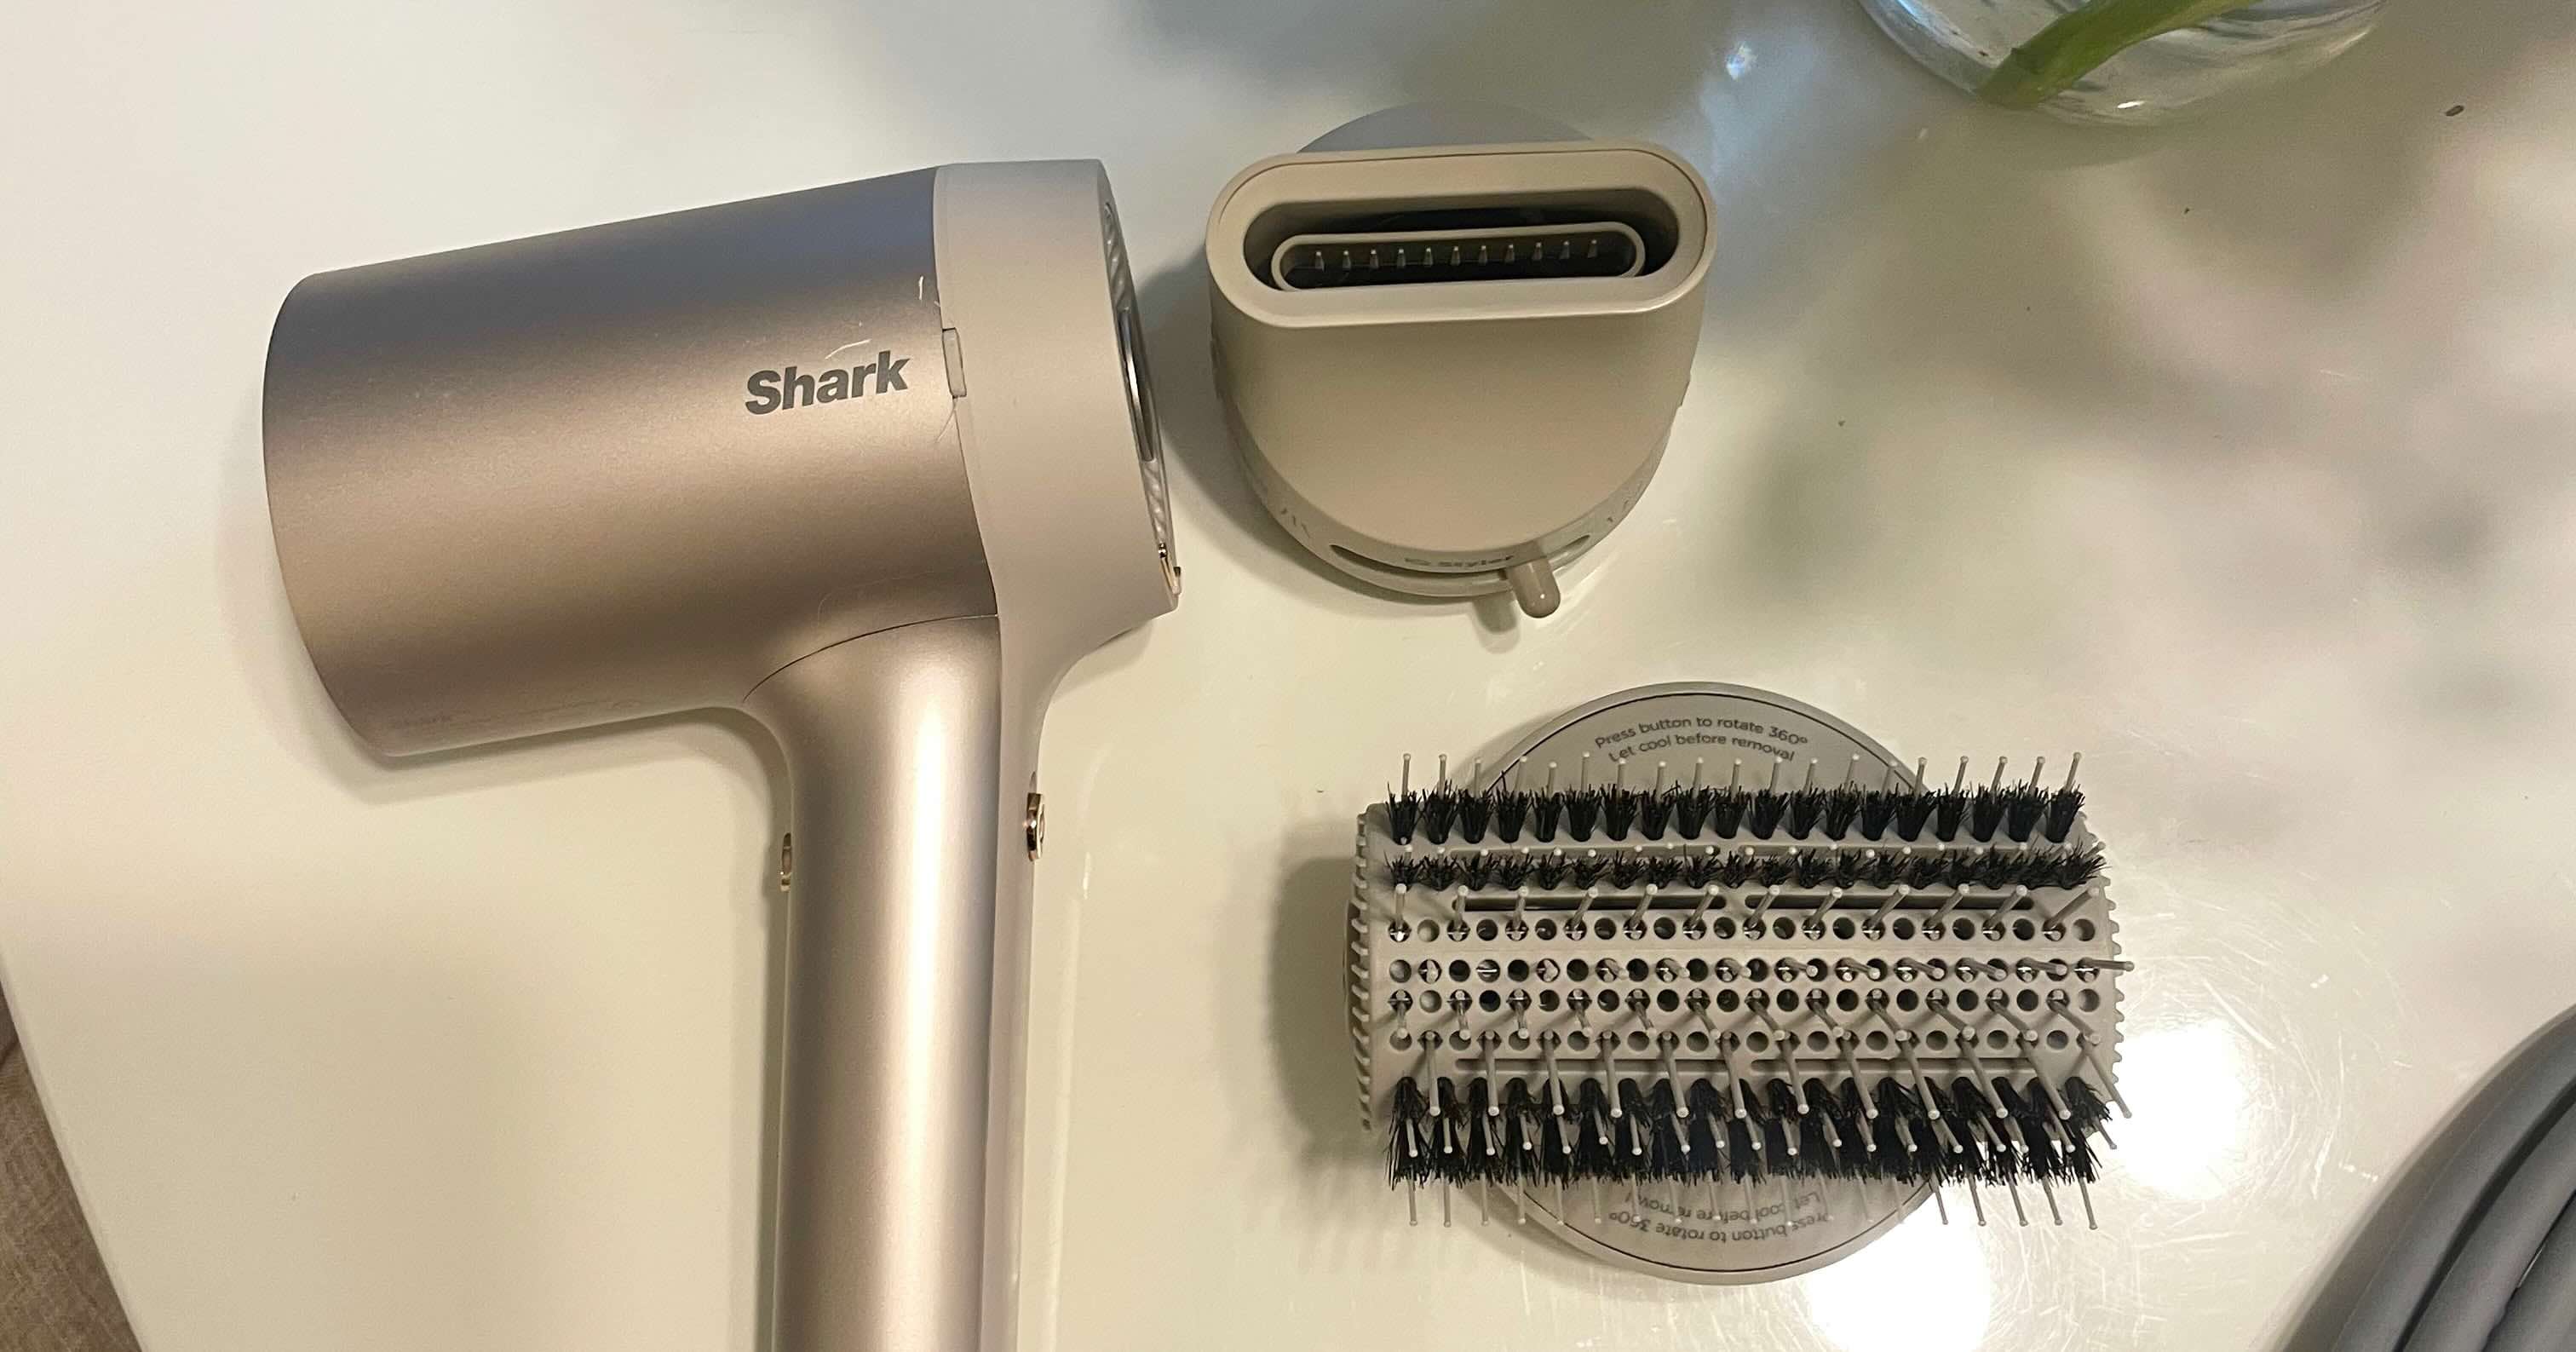 How To Clean Filter On Shark Hair Dryer